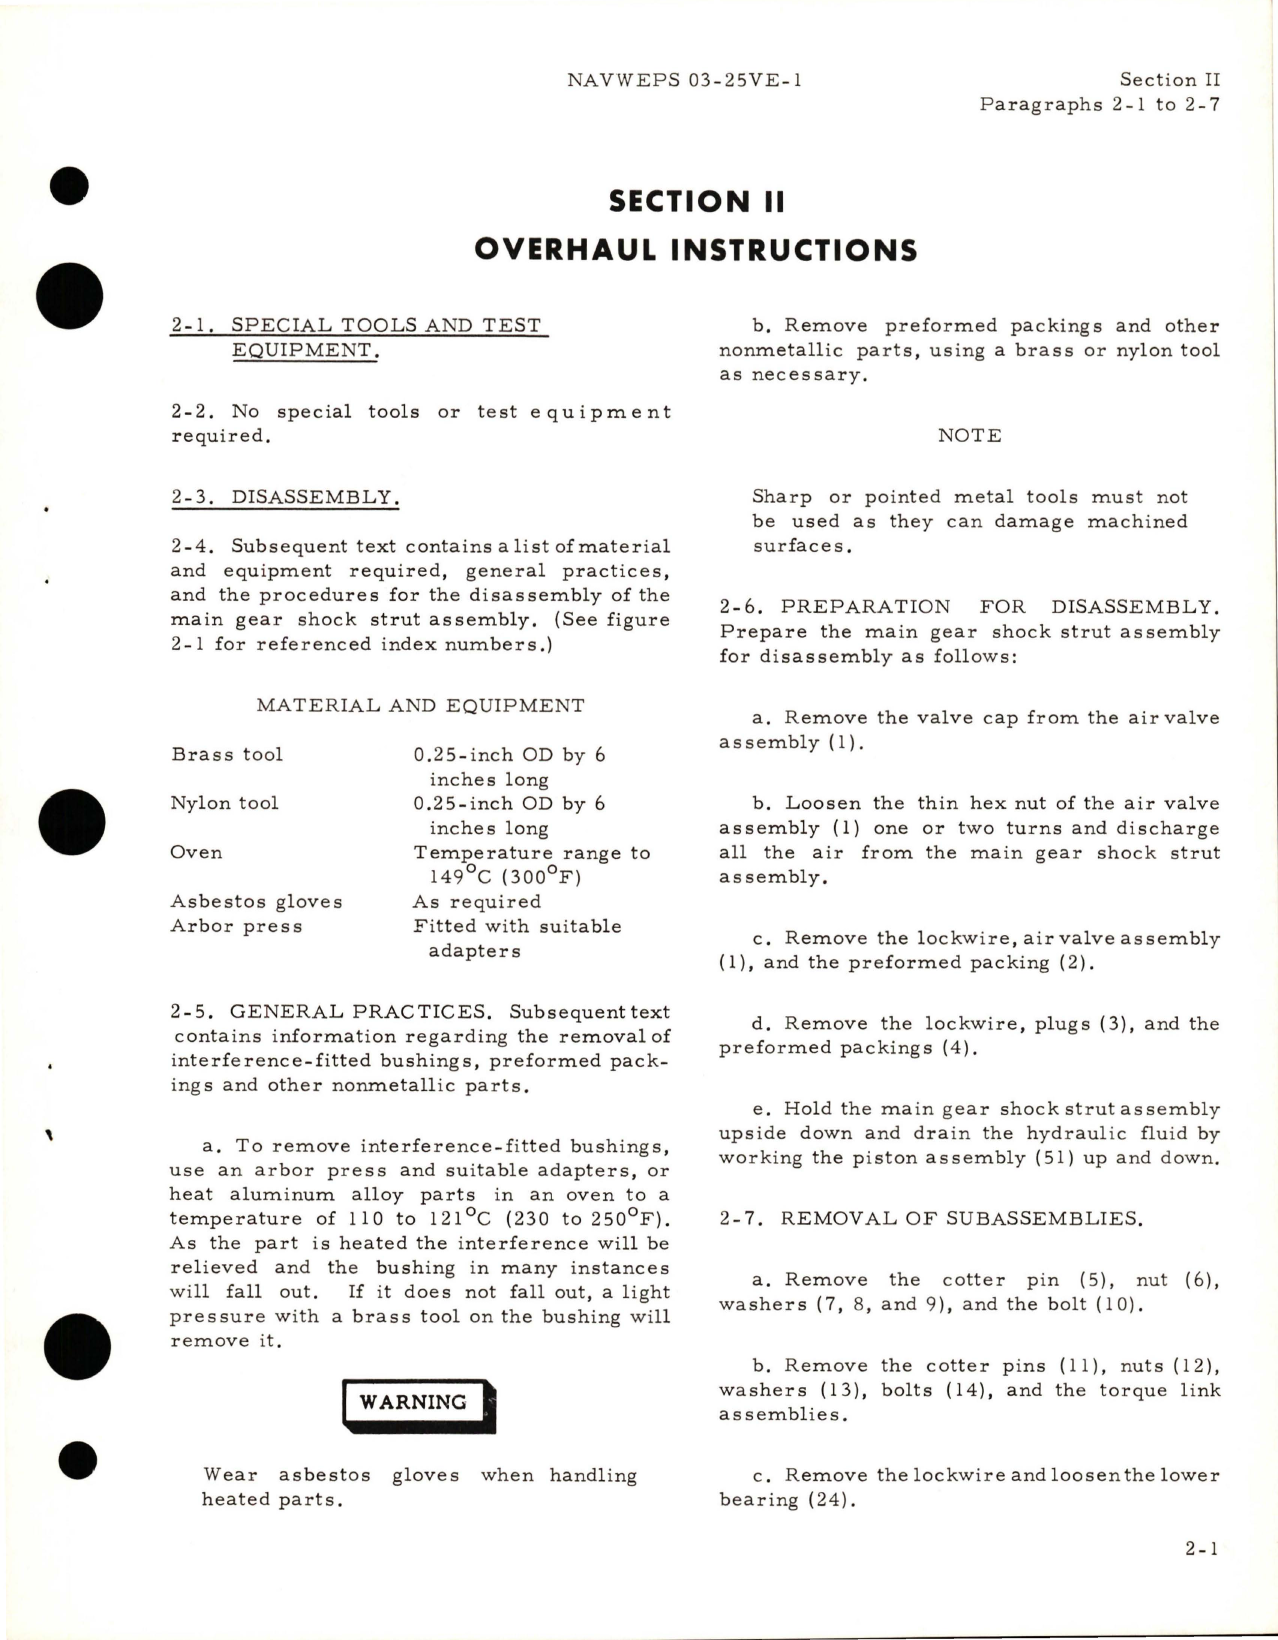 Sample page 7 from AirCorps Library document: Overhaul Instructions for Main Gear Shock Strut Assembly - Part A02L1000-1, A02L1000-3, A02L1000-5, and A02L1000-7 